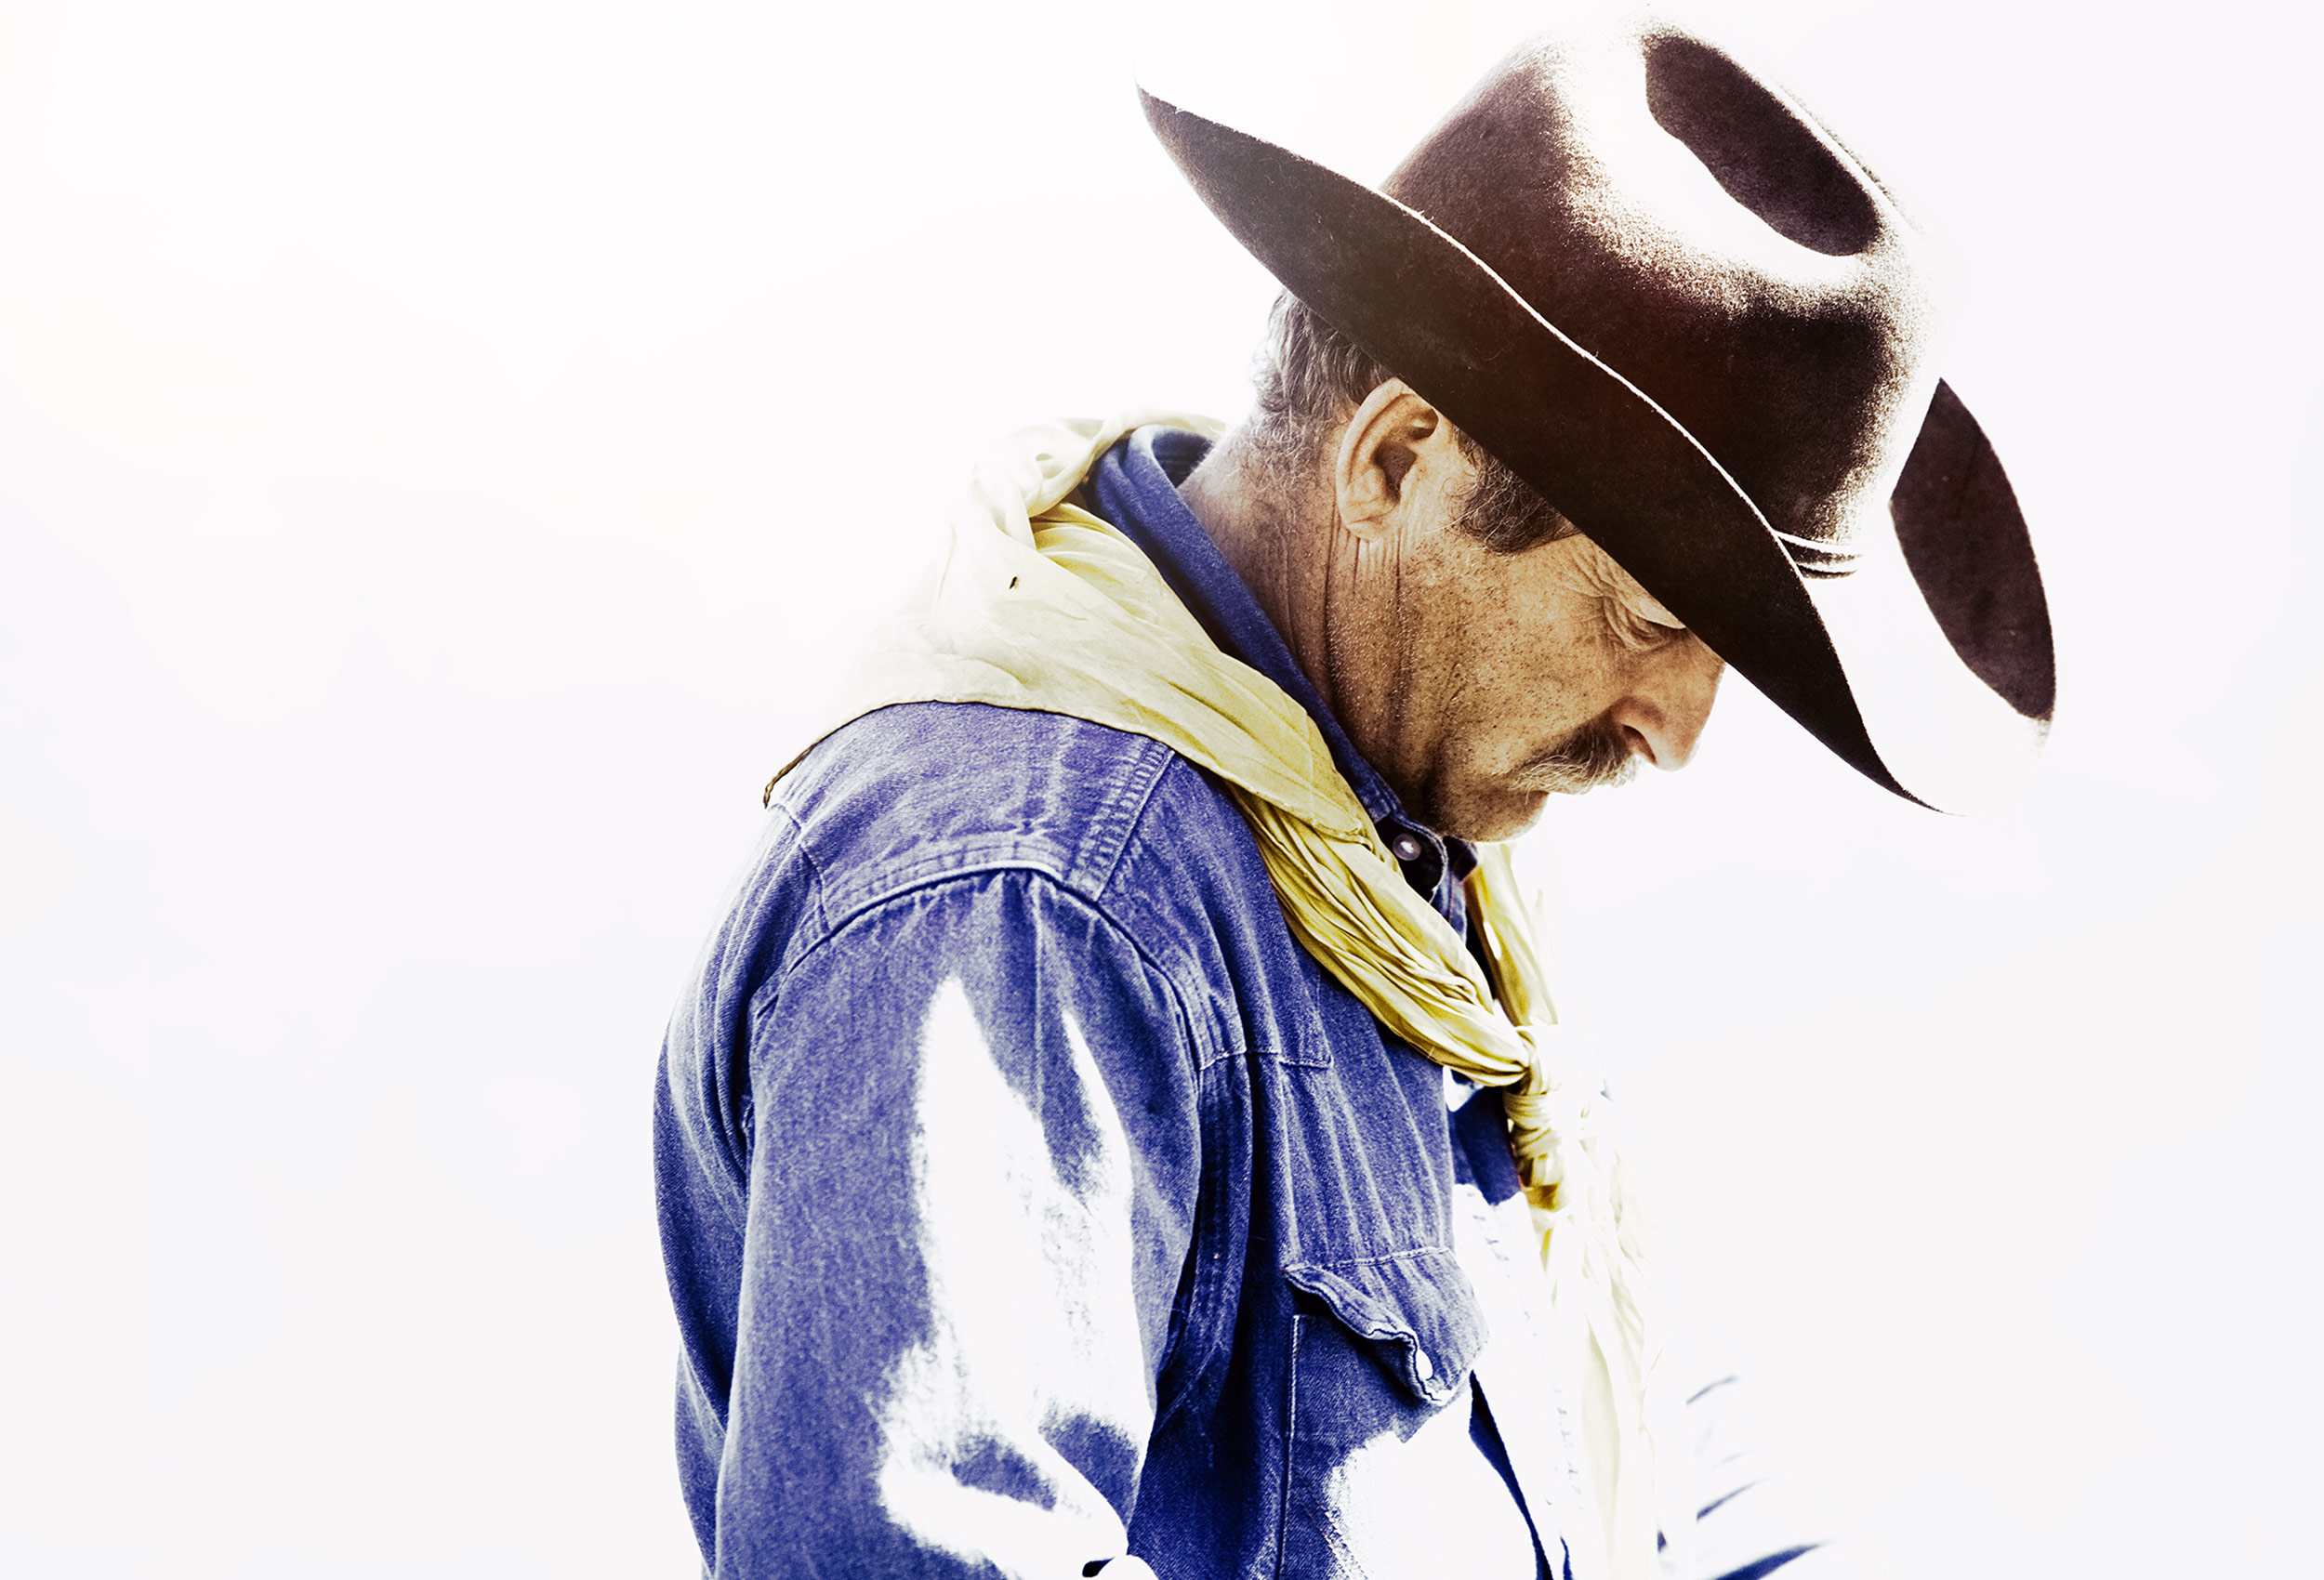 Cowboy looking down against a white background